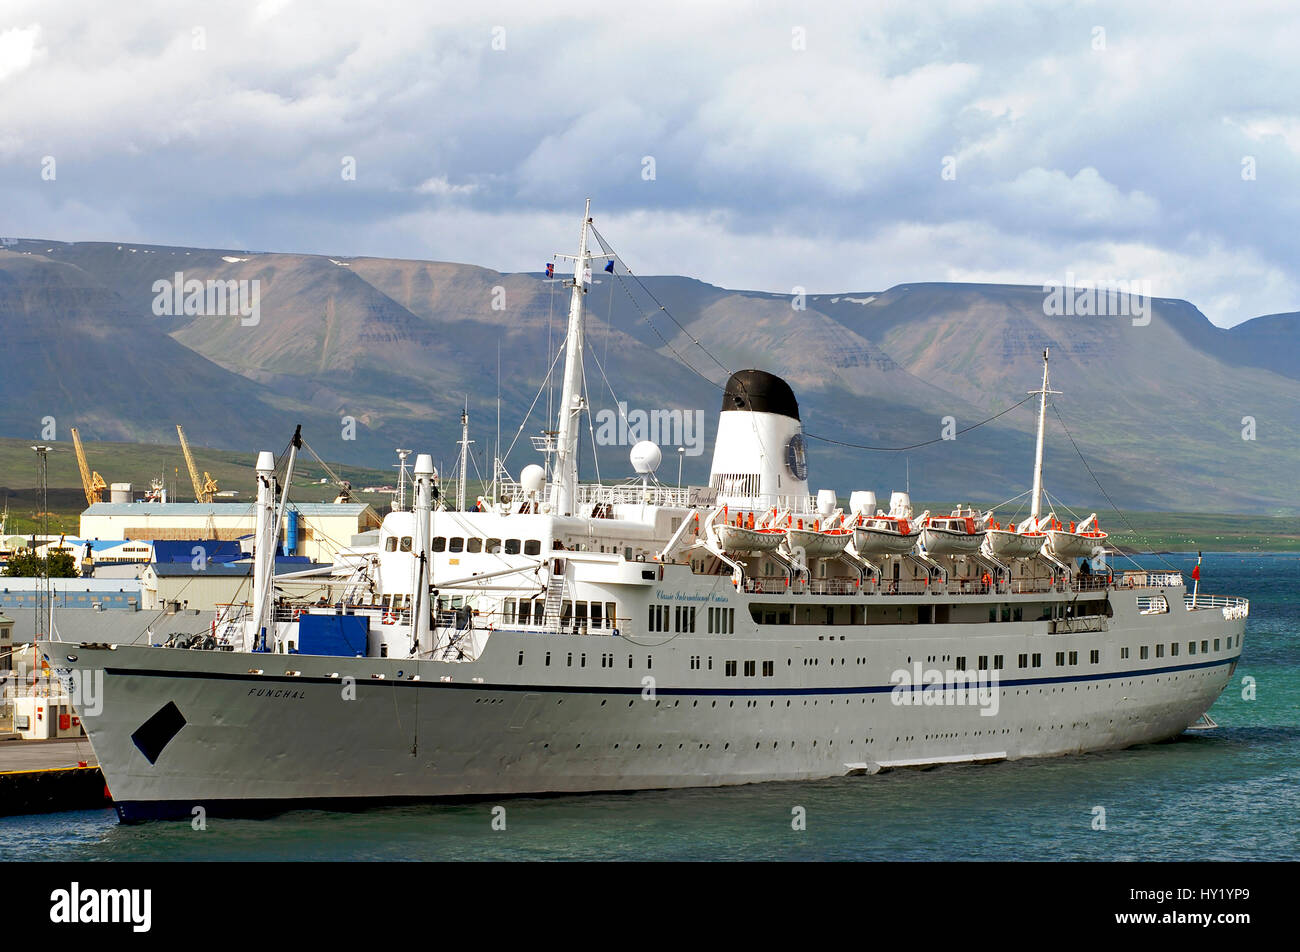 This stock photo shows the cruise ship Funchal anchored in the port of Akureyri in Iceland. The ship is cruising for Classic International Cruises. Th Stock Photo